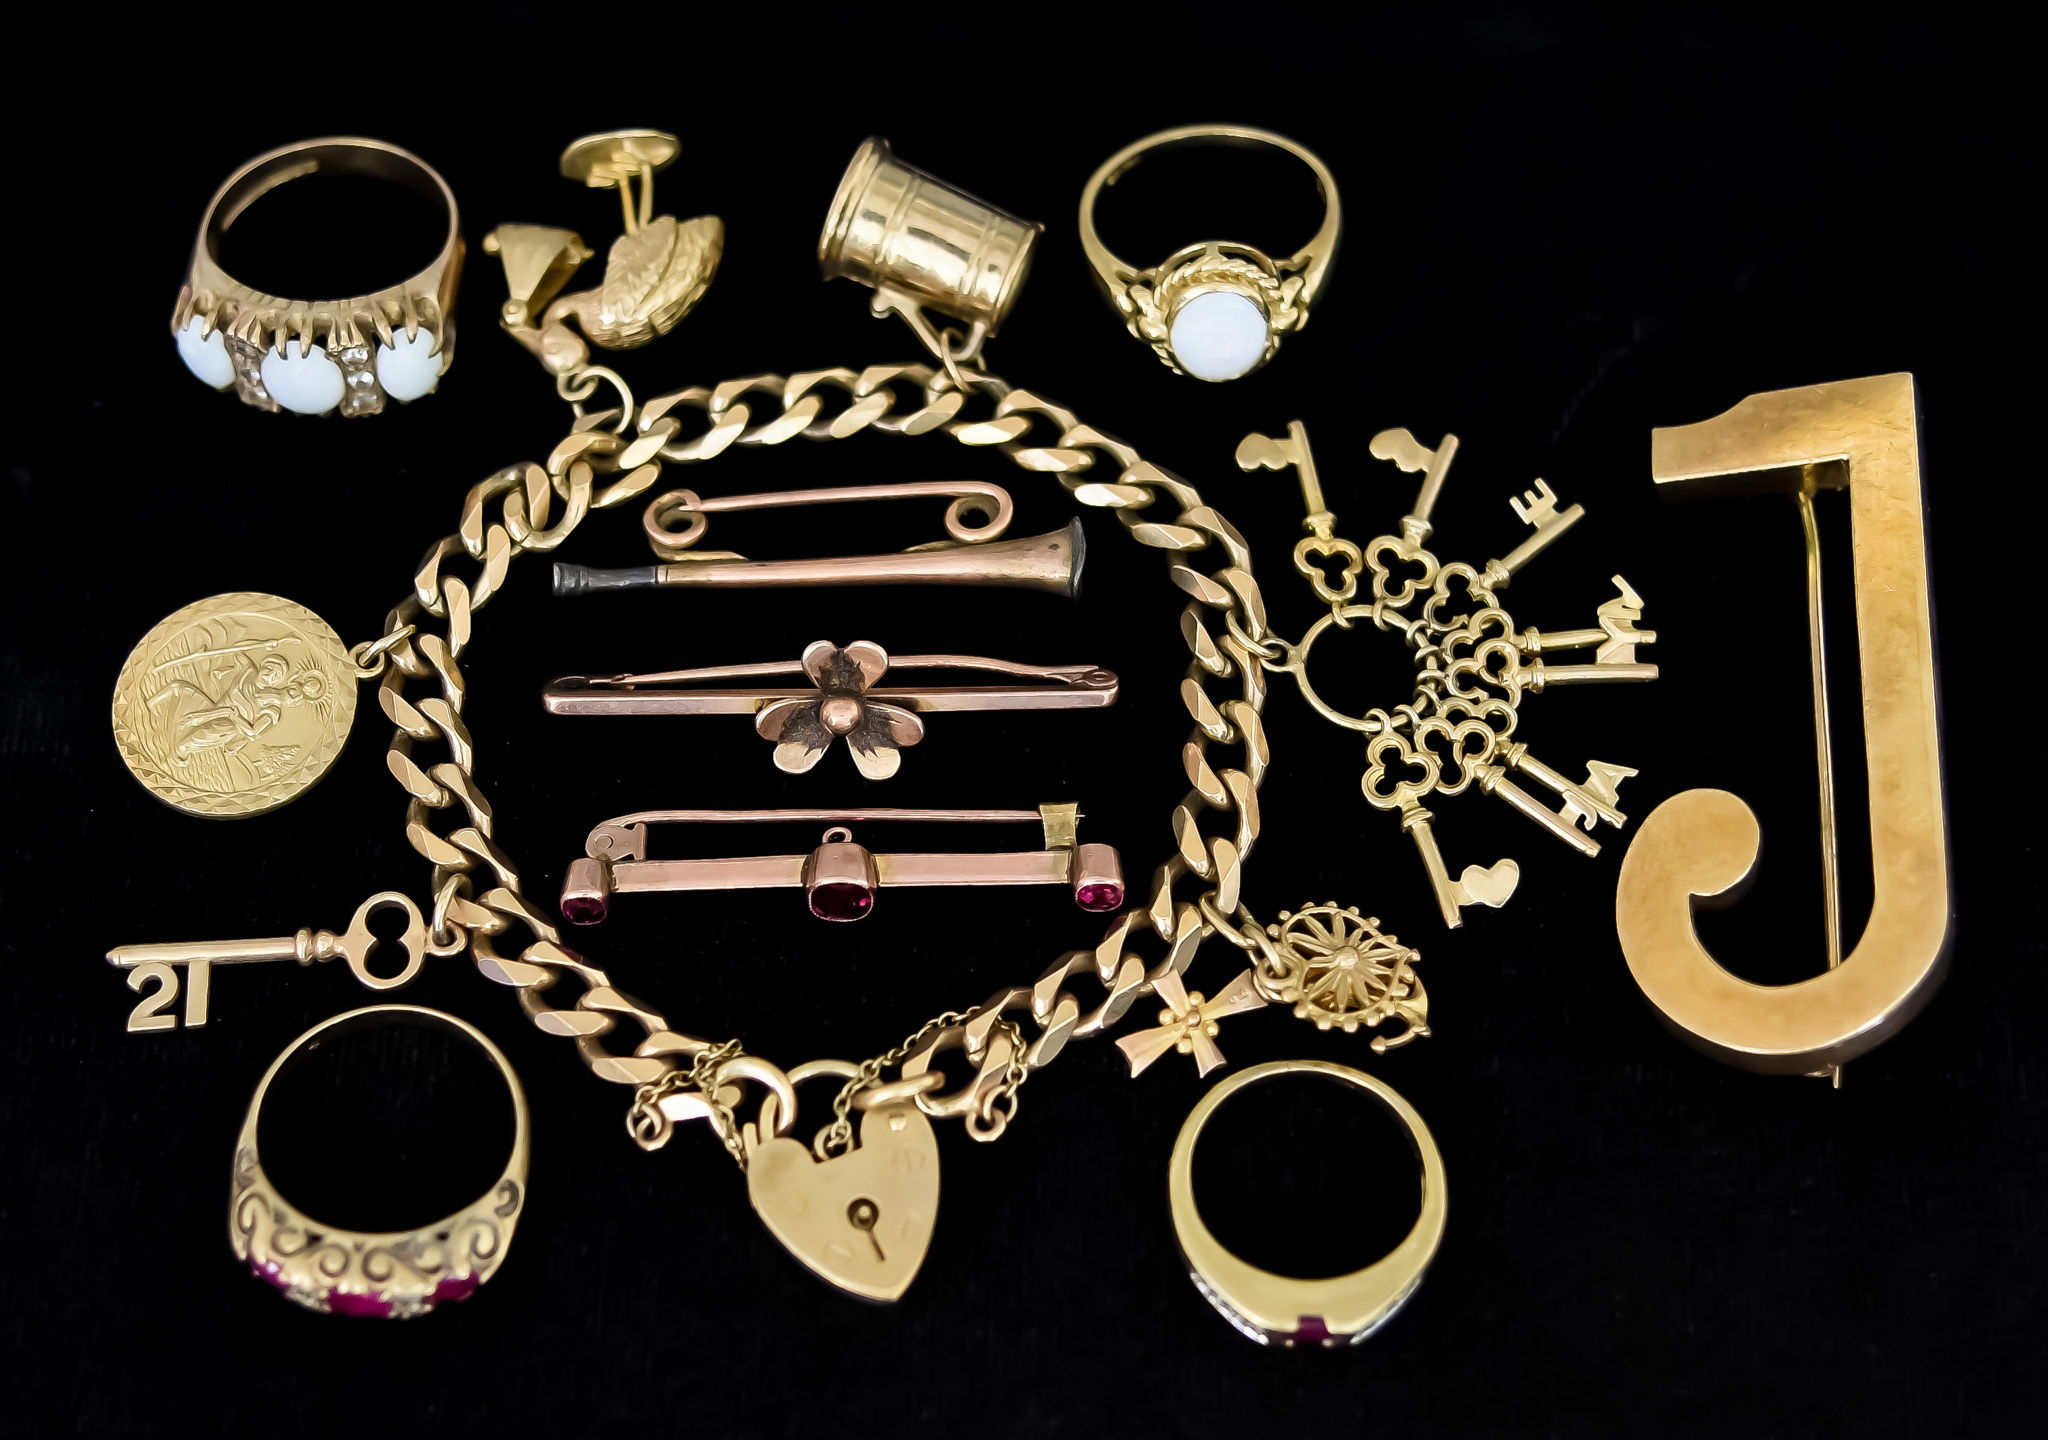 A Mixed Lot of 9ct Gold, comprising - charm bracelet with seven charms, various, brooch depicting